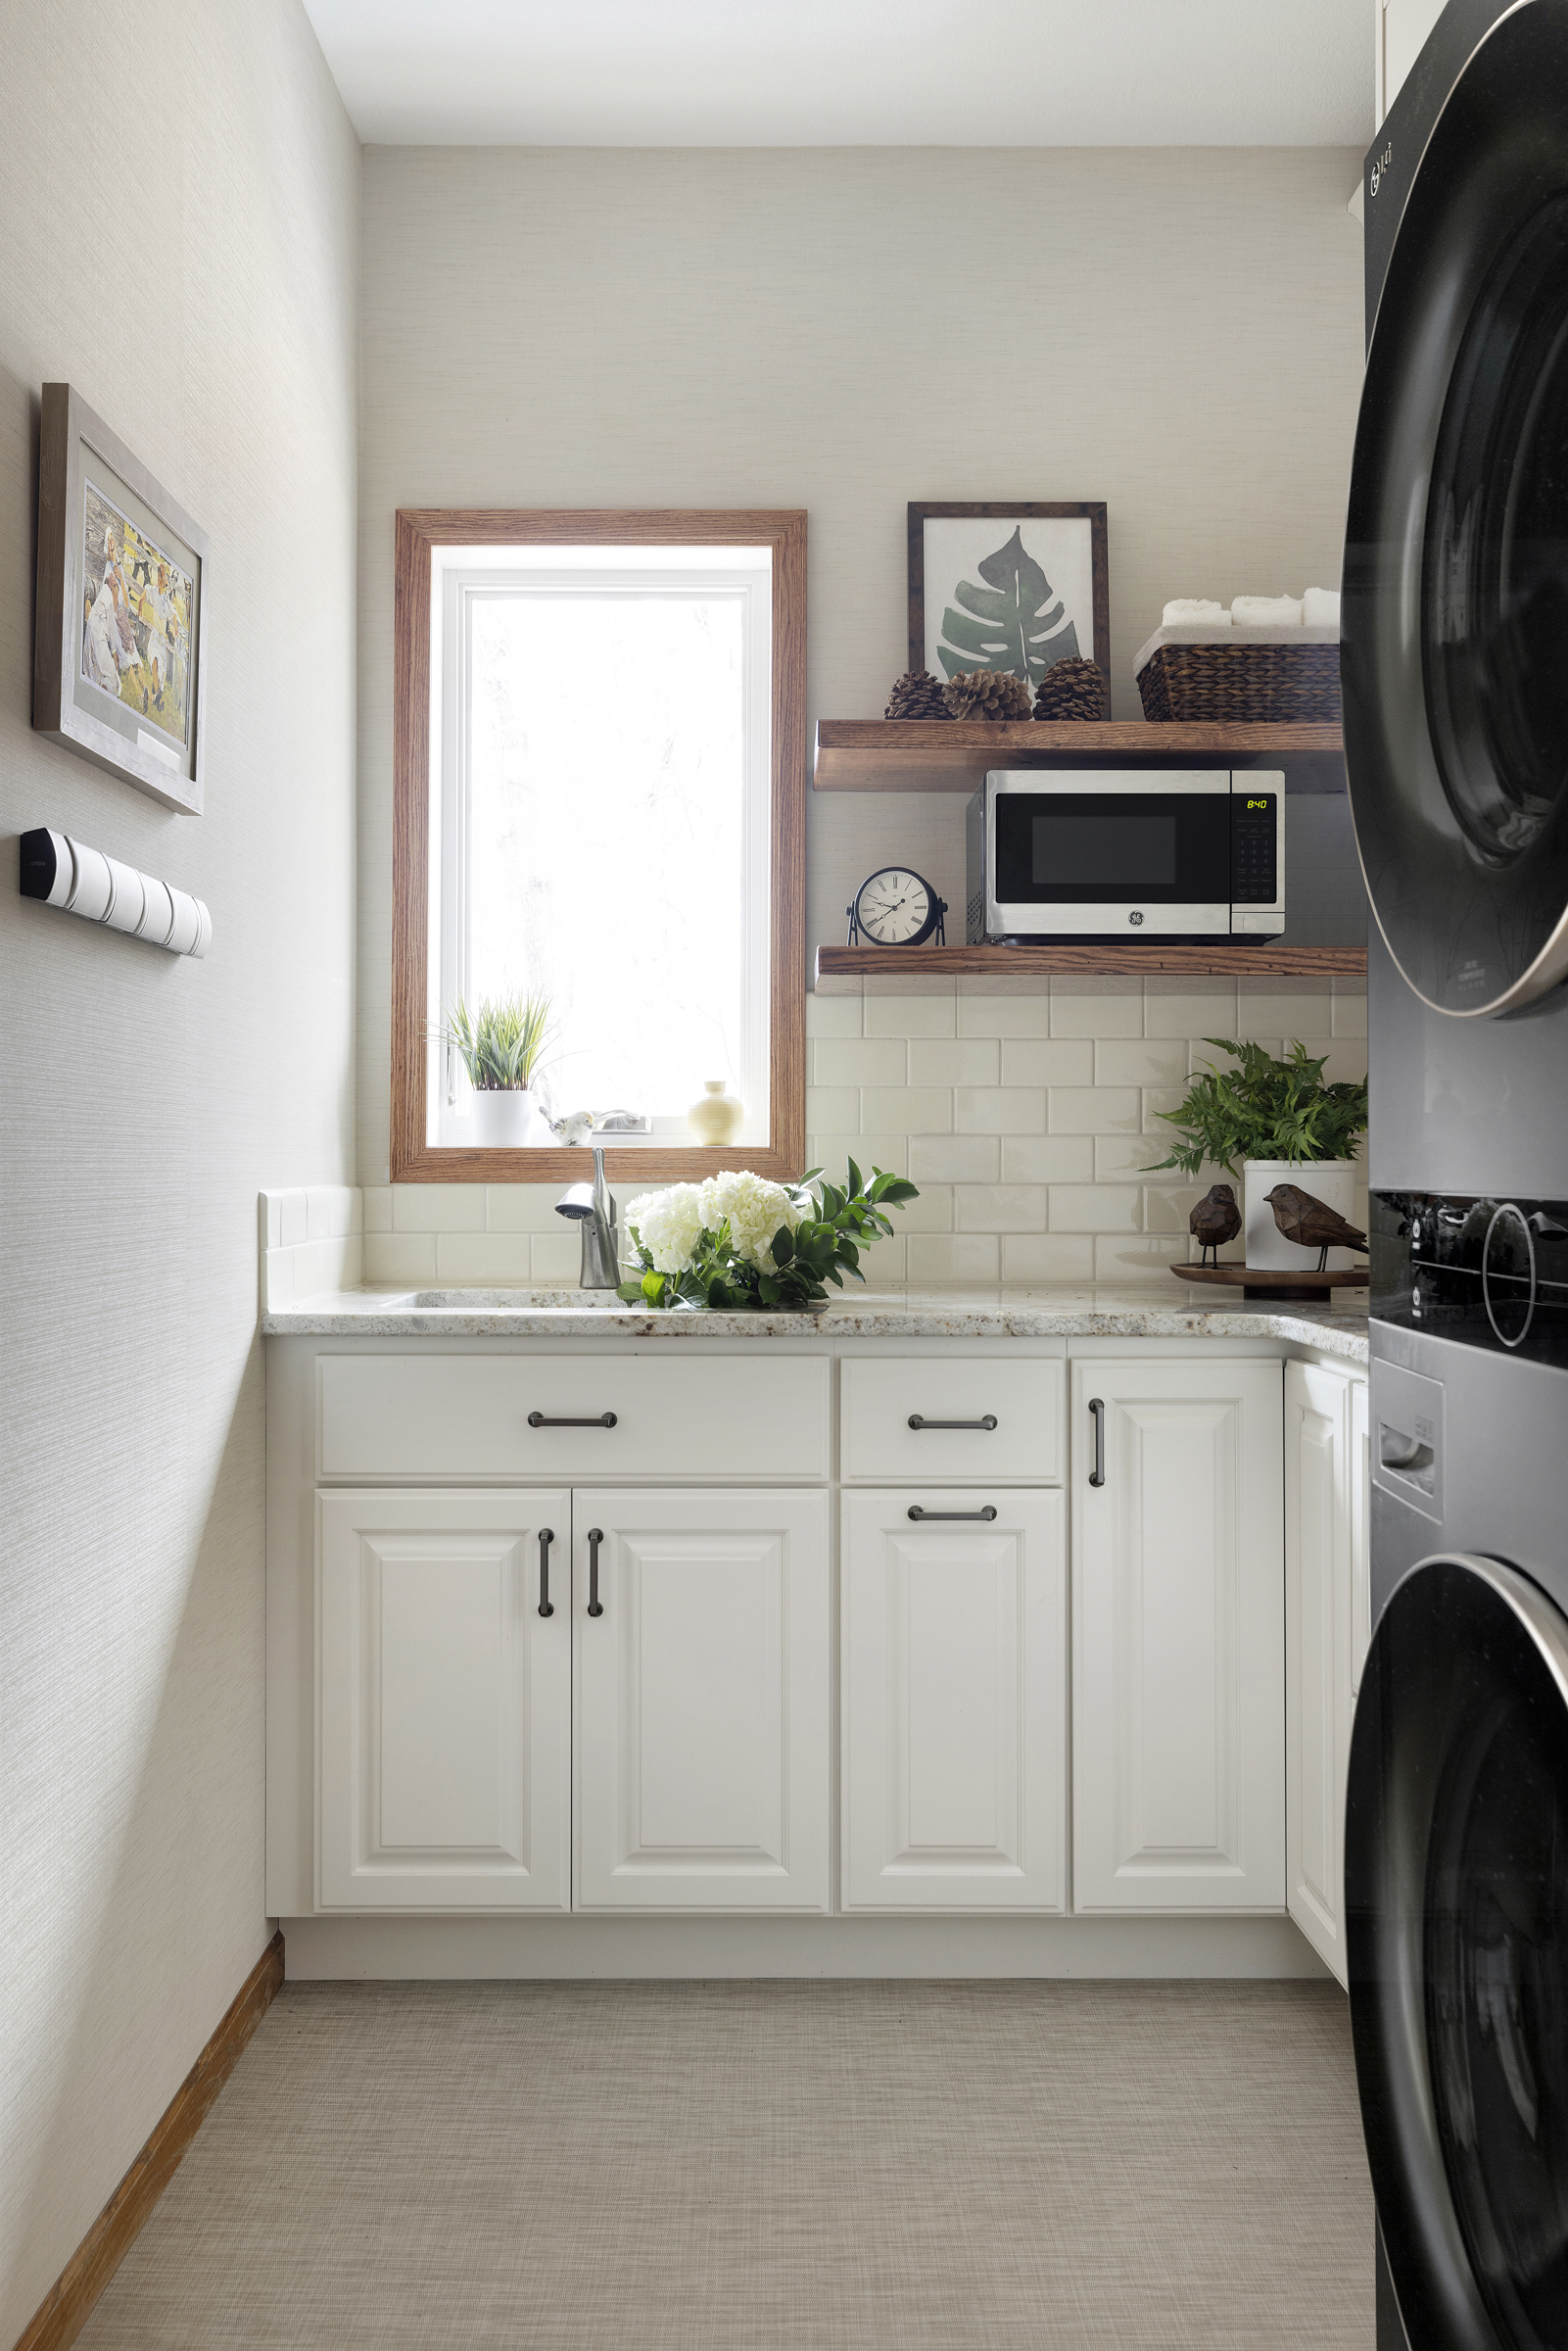 Remodeled laundry room with white cabinets, white subway tile, and window over sink